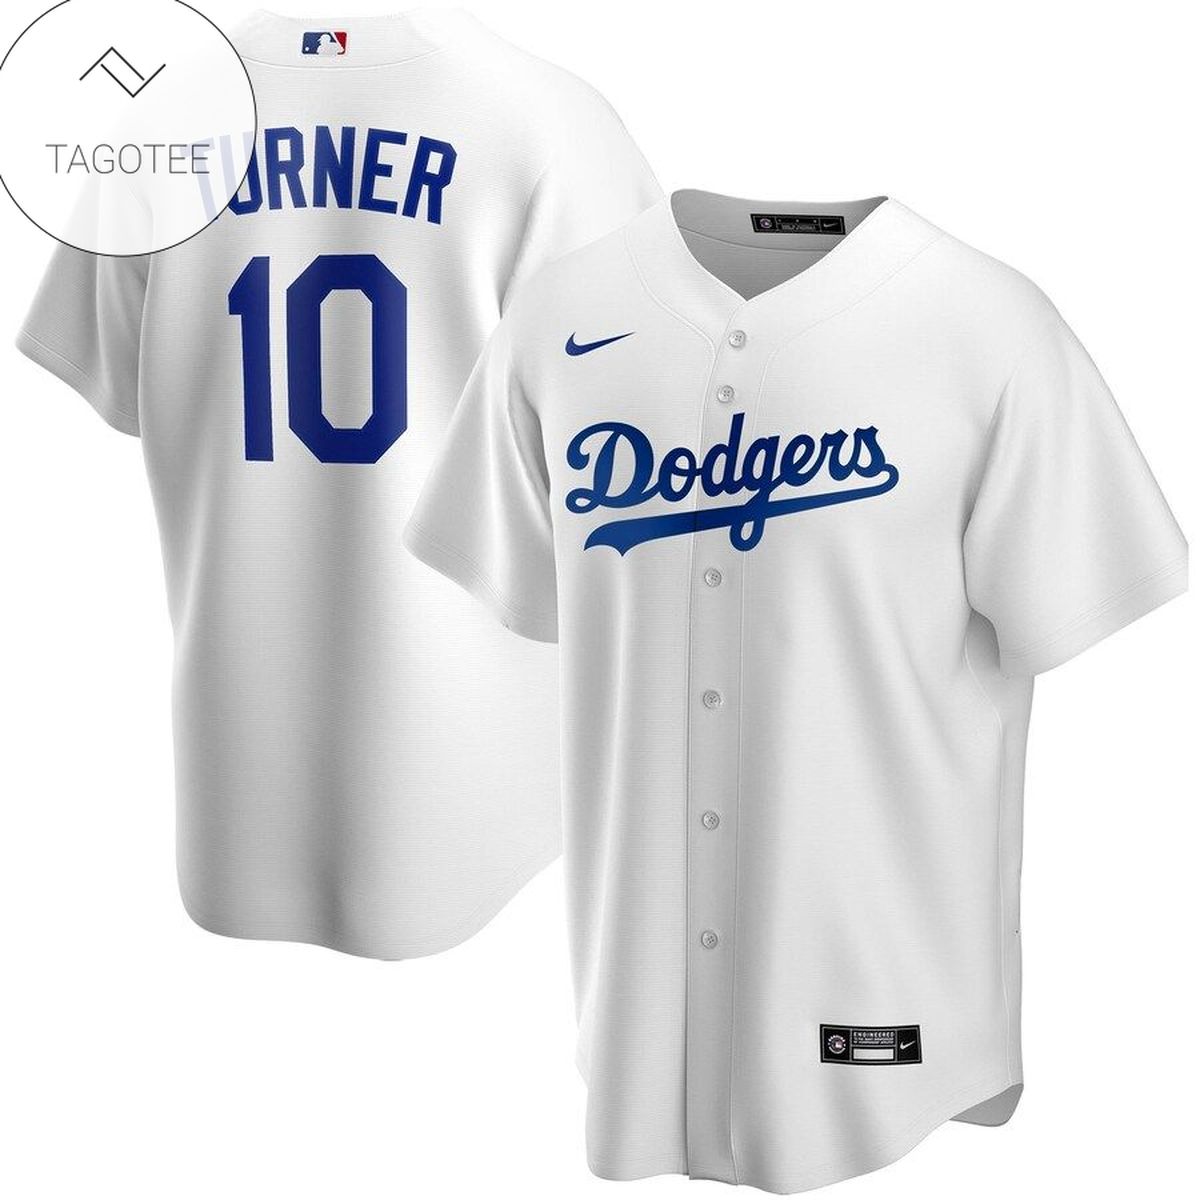 Los Angeles Dodgers - Justin Turner #10 Jersey - Premium Jersey Shirt - Gift For Sport Lovers For Fans - Mlb Jersey